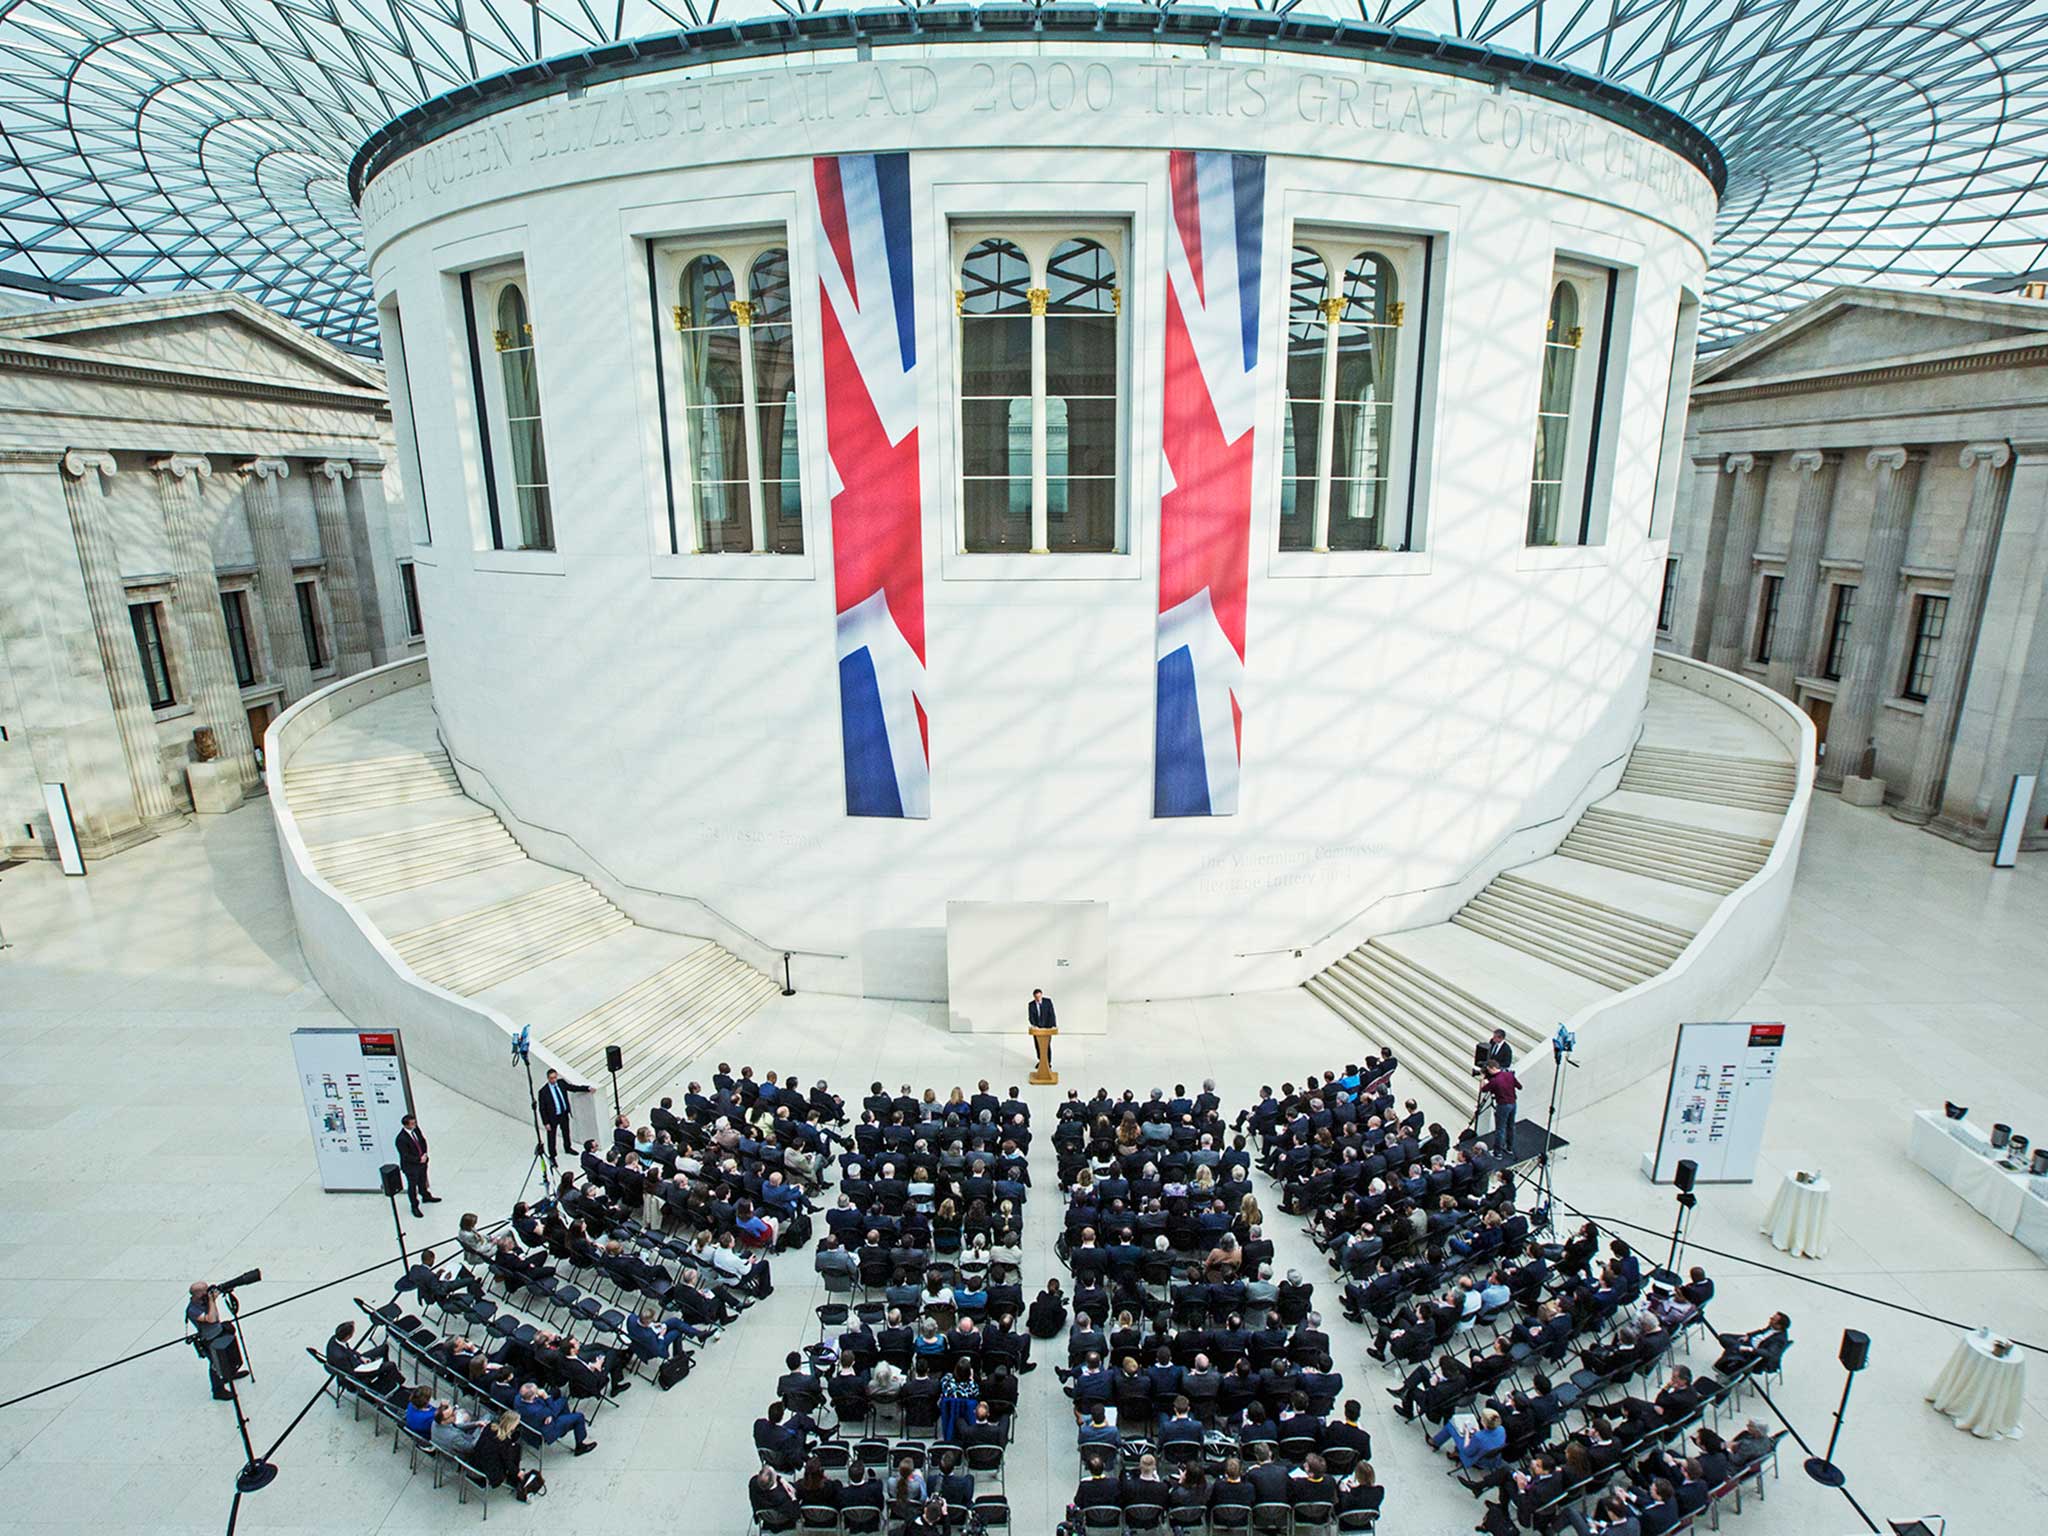 British Prime Minister David Cameron delivers a speech on the European Union (EU), at the British Museum in London. Prime Minister David Cameron warned that if Britain left the European Union it would put peace and stability on the continent at risk